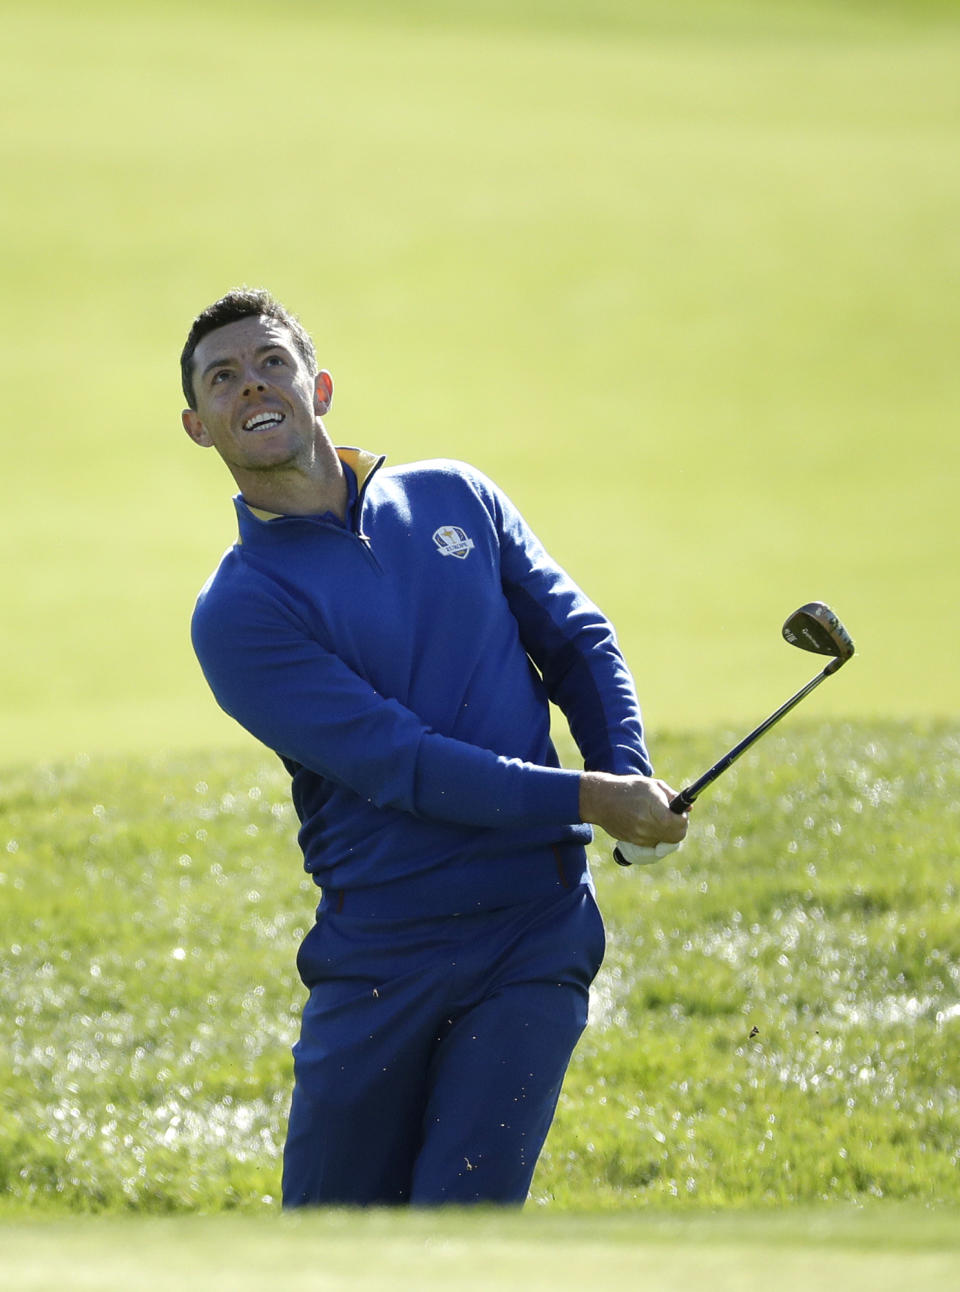 Europe's Rory McIlroy chips on to the 5th green during a singles match on the final day of the 42nd Ryder Cup at Le Golf National in Saint-Quentin-en-Yvelines, outside Paris, France, Sunday, Sept. 30, 2018. (AP Photo/Matt Dunham)